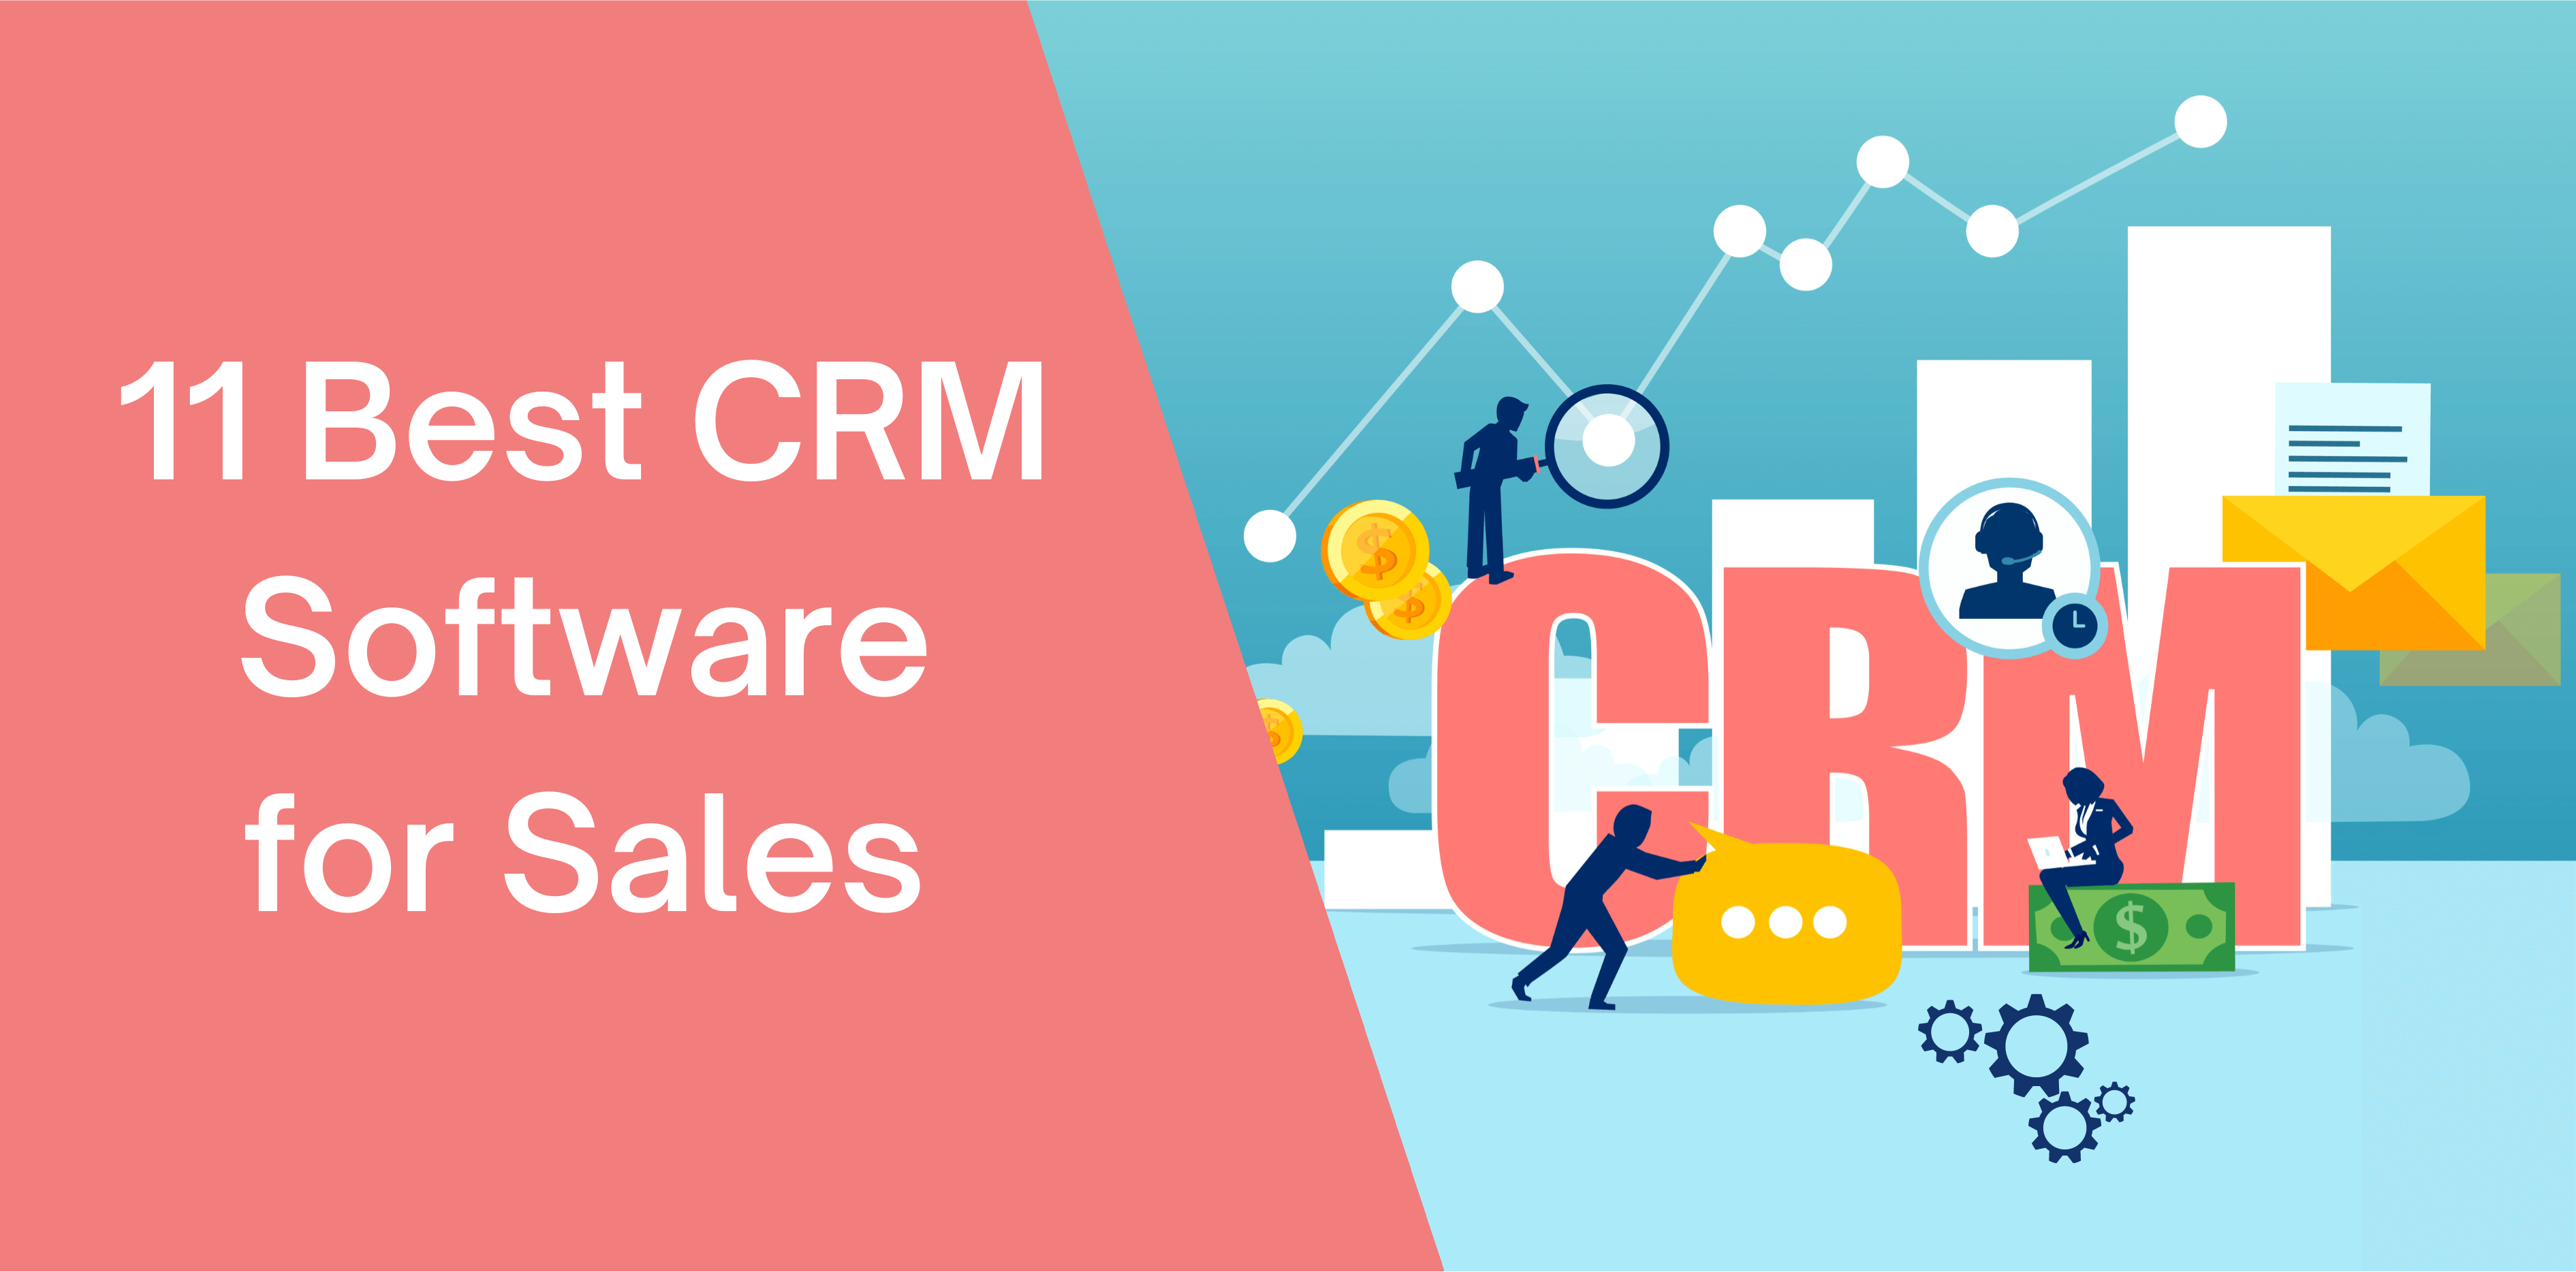 11 Best CRM Software for Sales - Octopus CRM